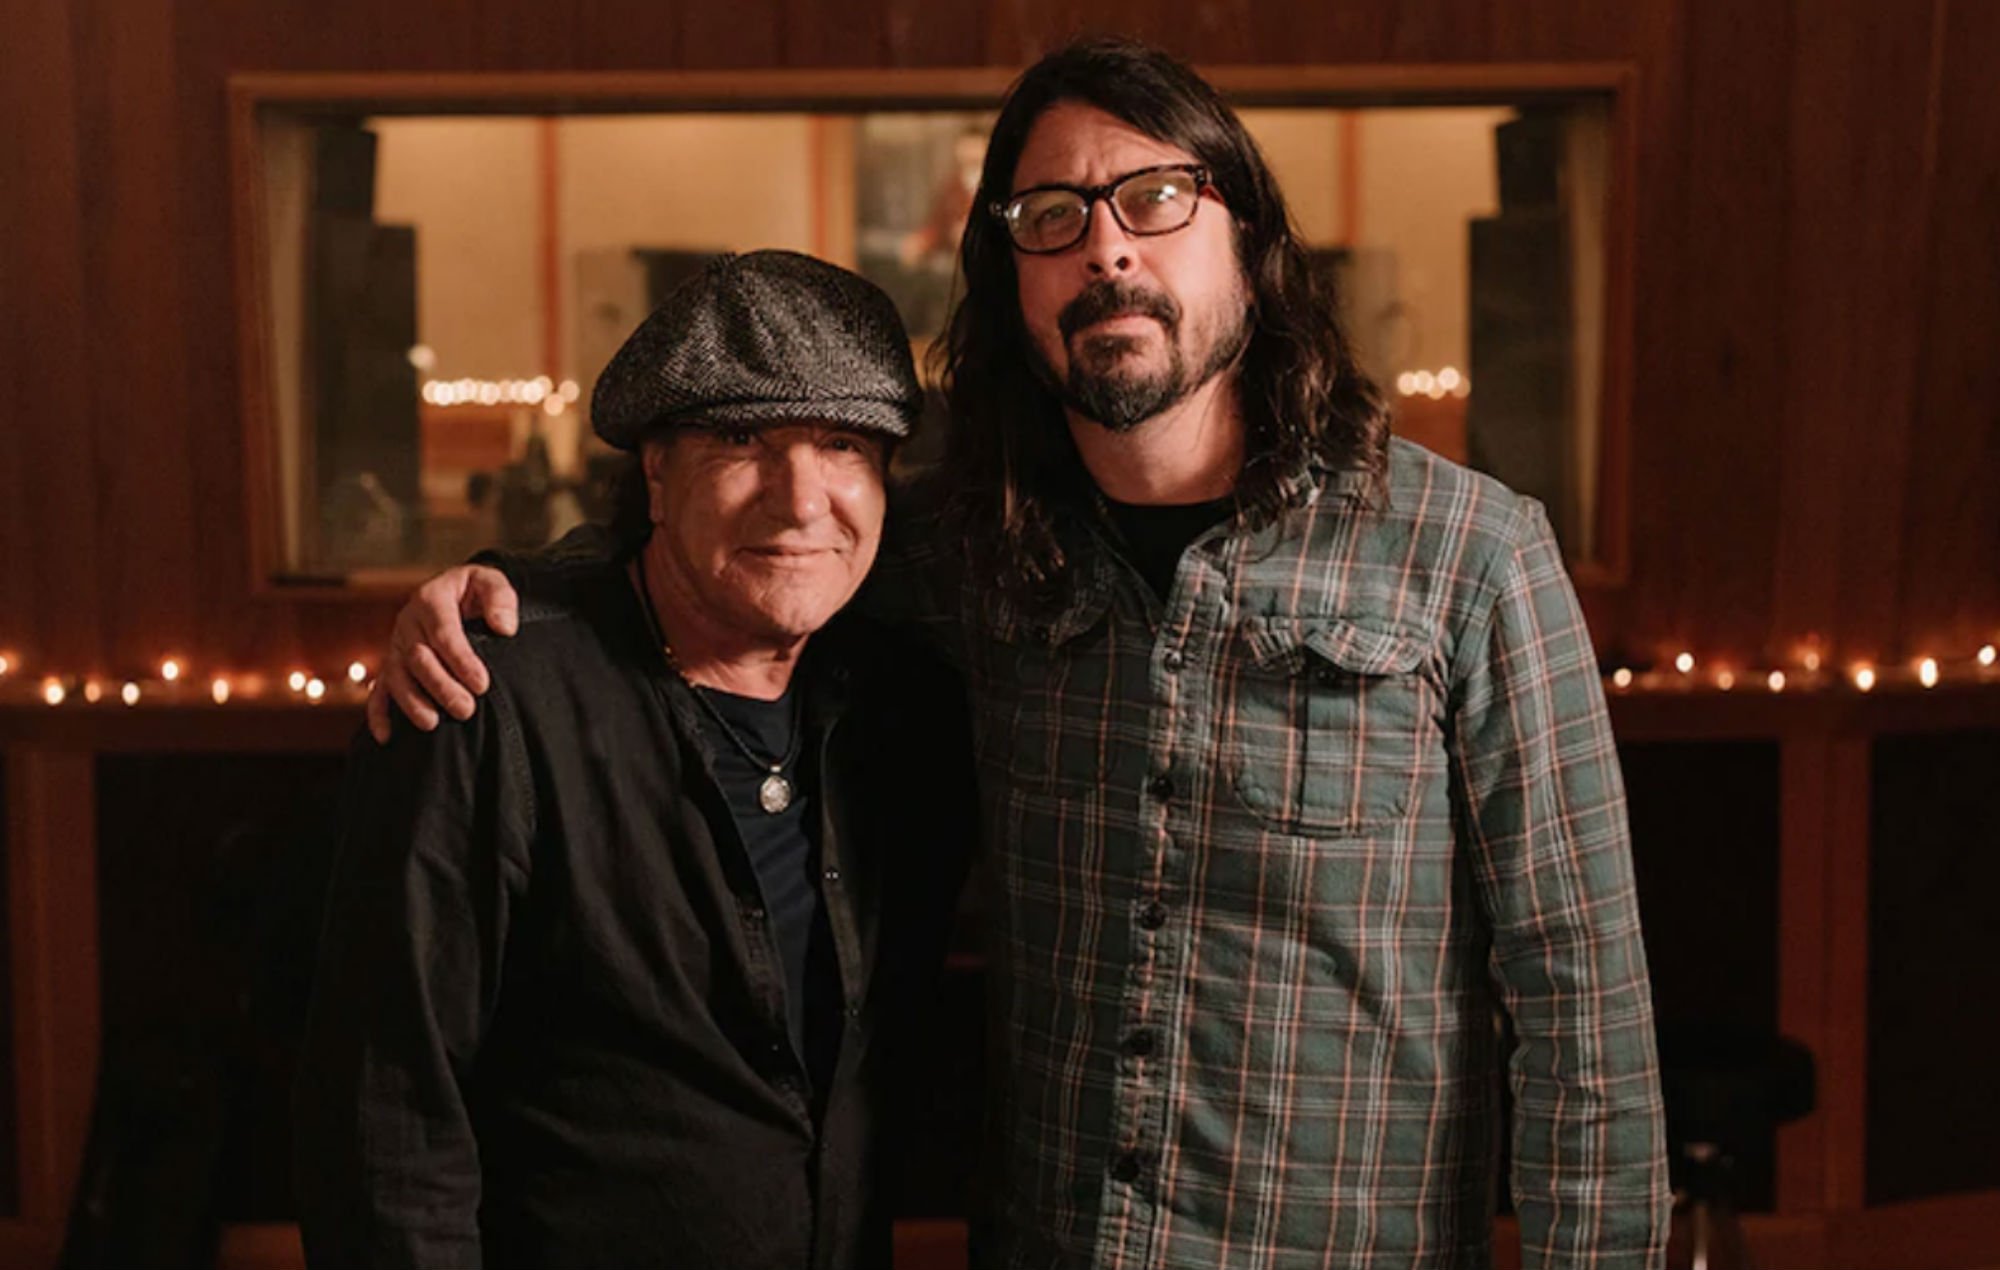 Dave Grohl Tells AC/DC's Brian Johnson What Makes Him Want To Quit Foo Fighters